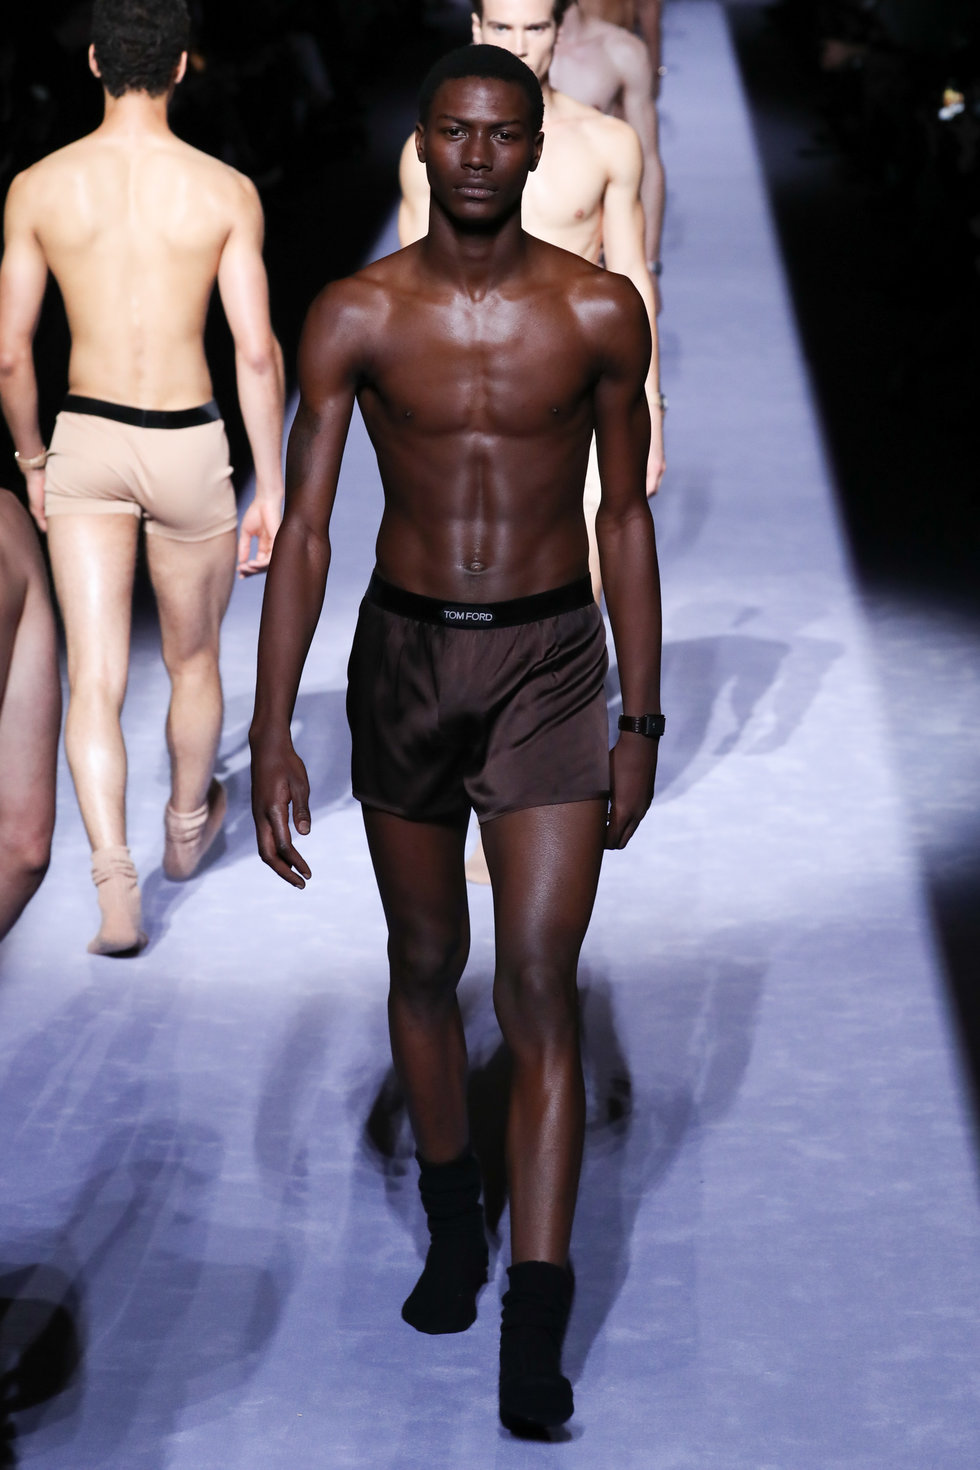 Tom Ford's Sexy Flesh Colored Underwear Makes a Near Nude Statement: All  the Different Skin Tones Make a Statement